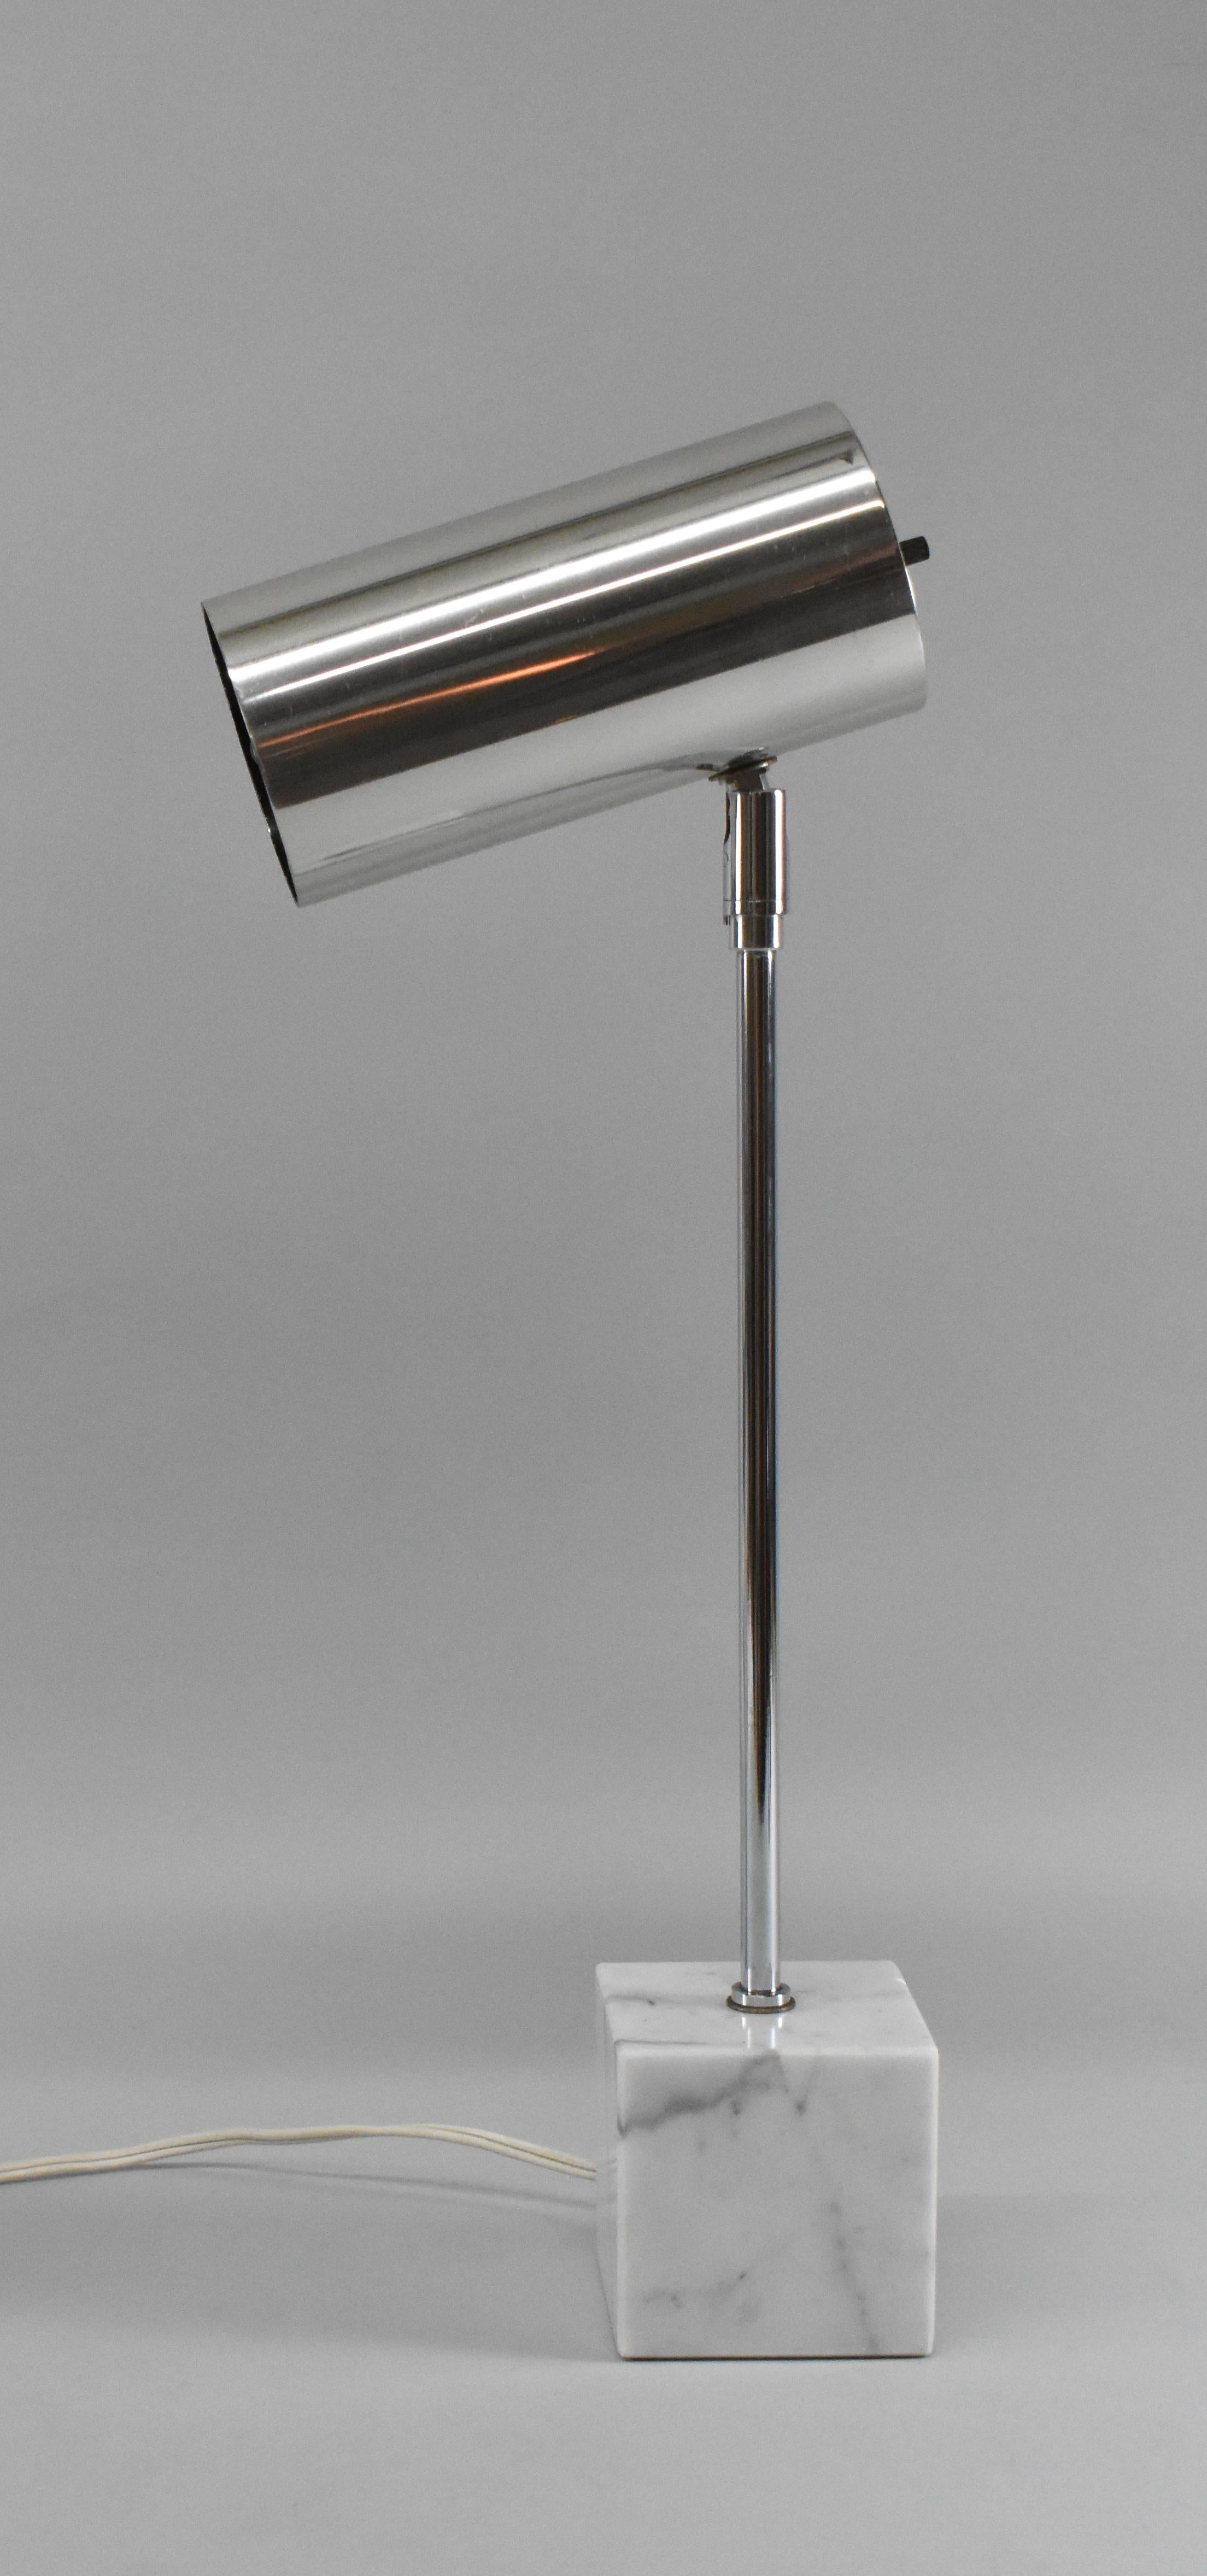 Koch Lowey Arco style chrome and marble table lamp. Neal Small design that swivels and adjusts.  